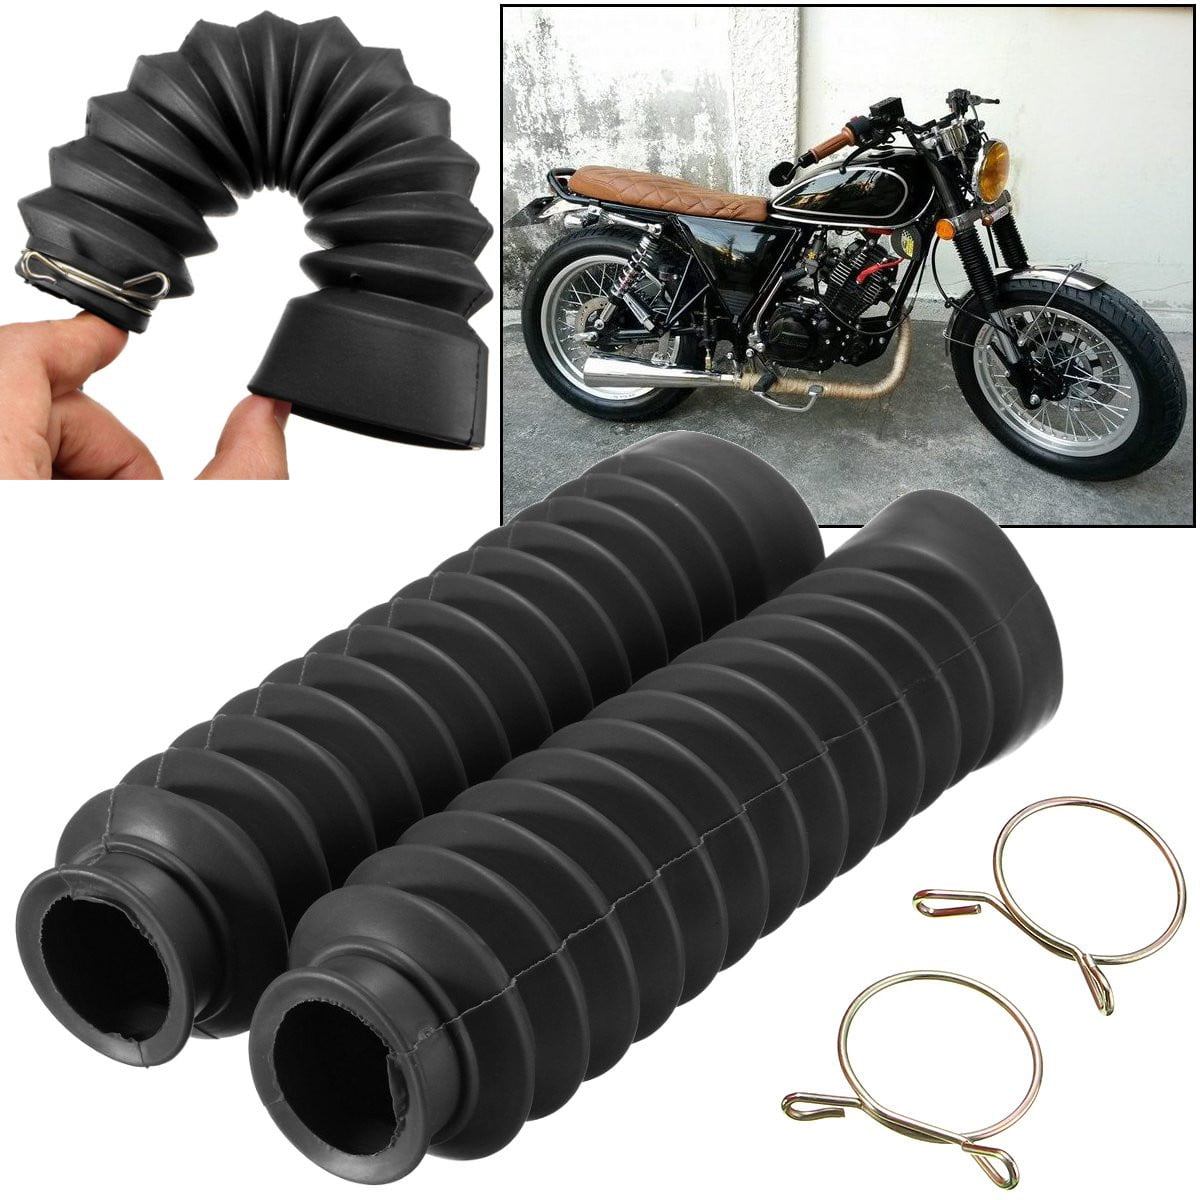 2Pcs Rubber ATC Motorcycle Front Fork Suspension Shock Cover Dust Shield Boots 